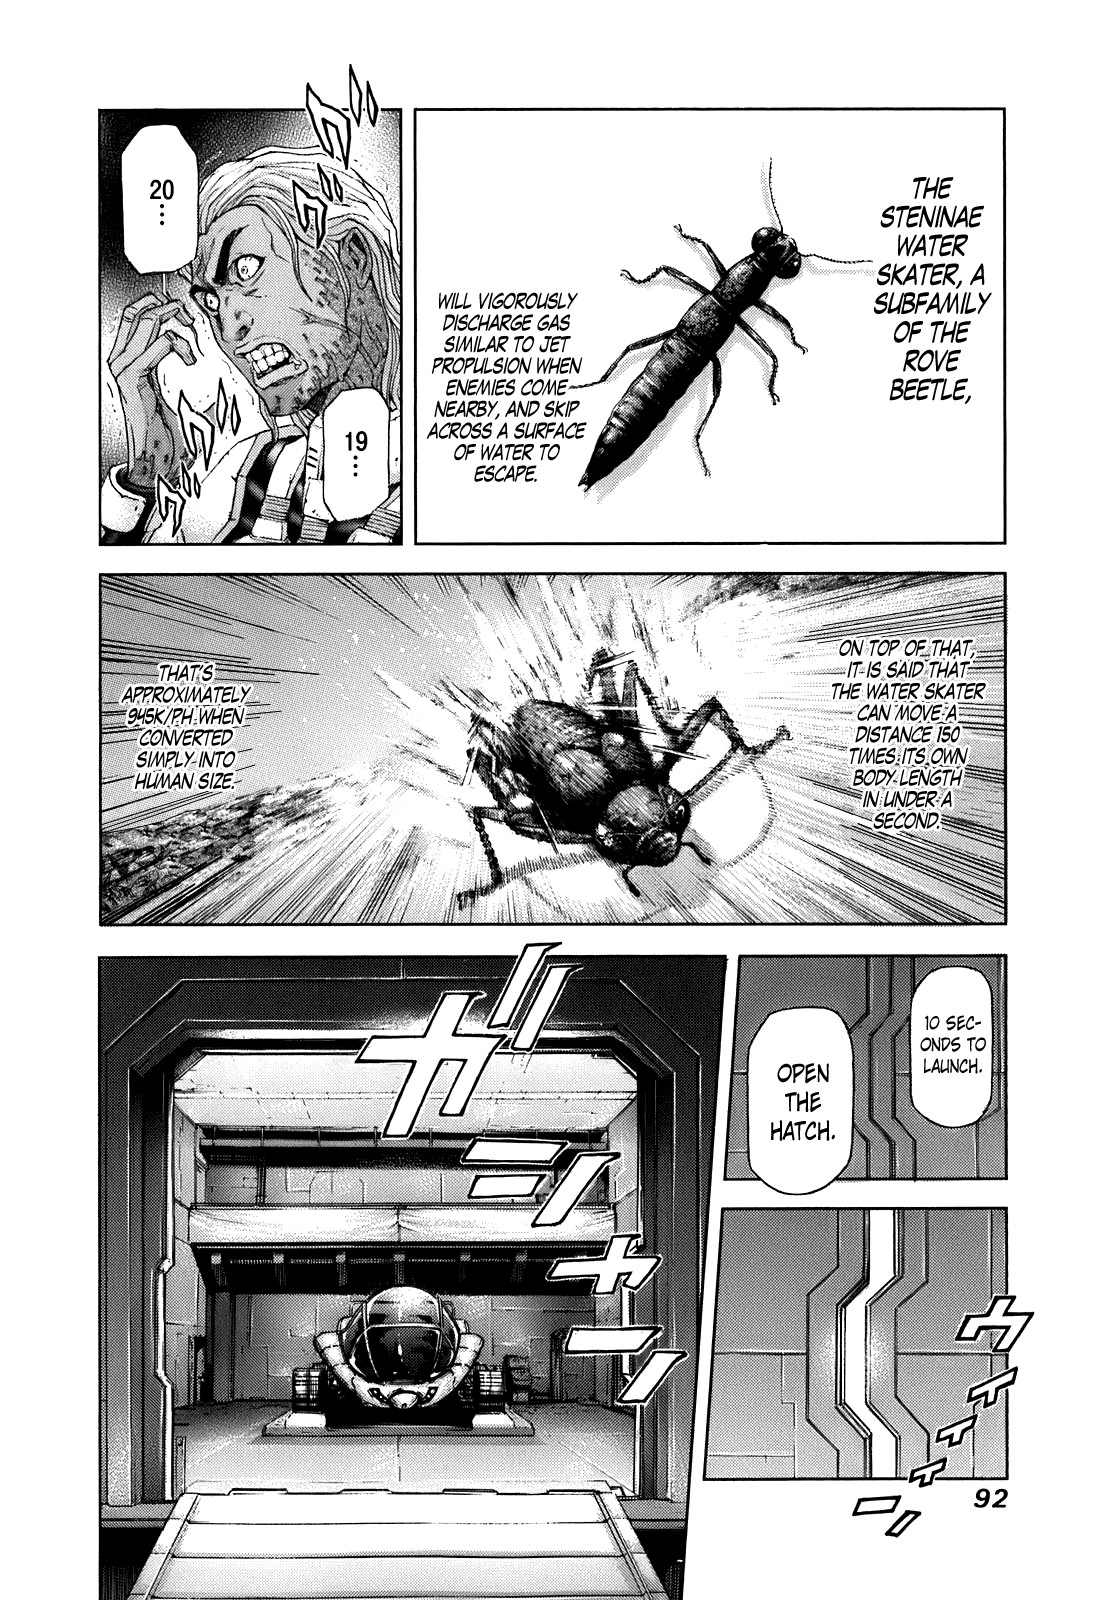 Terra ForMars chapter 3 page 19